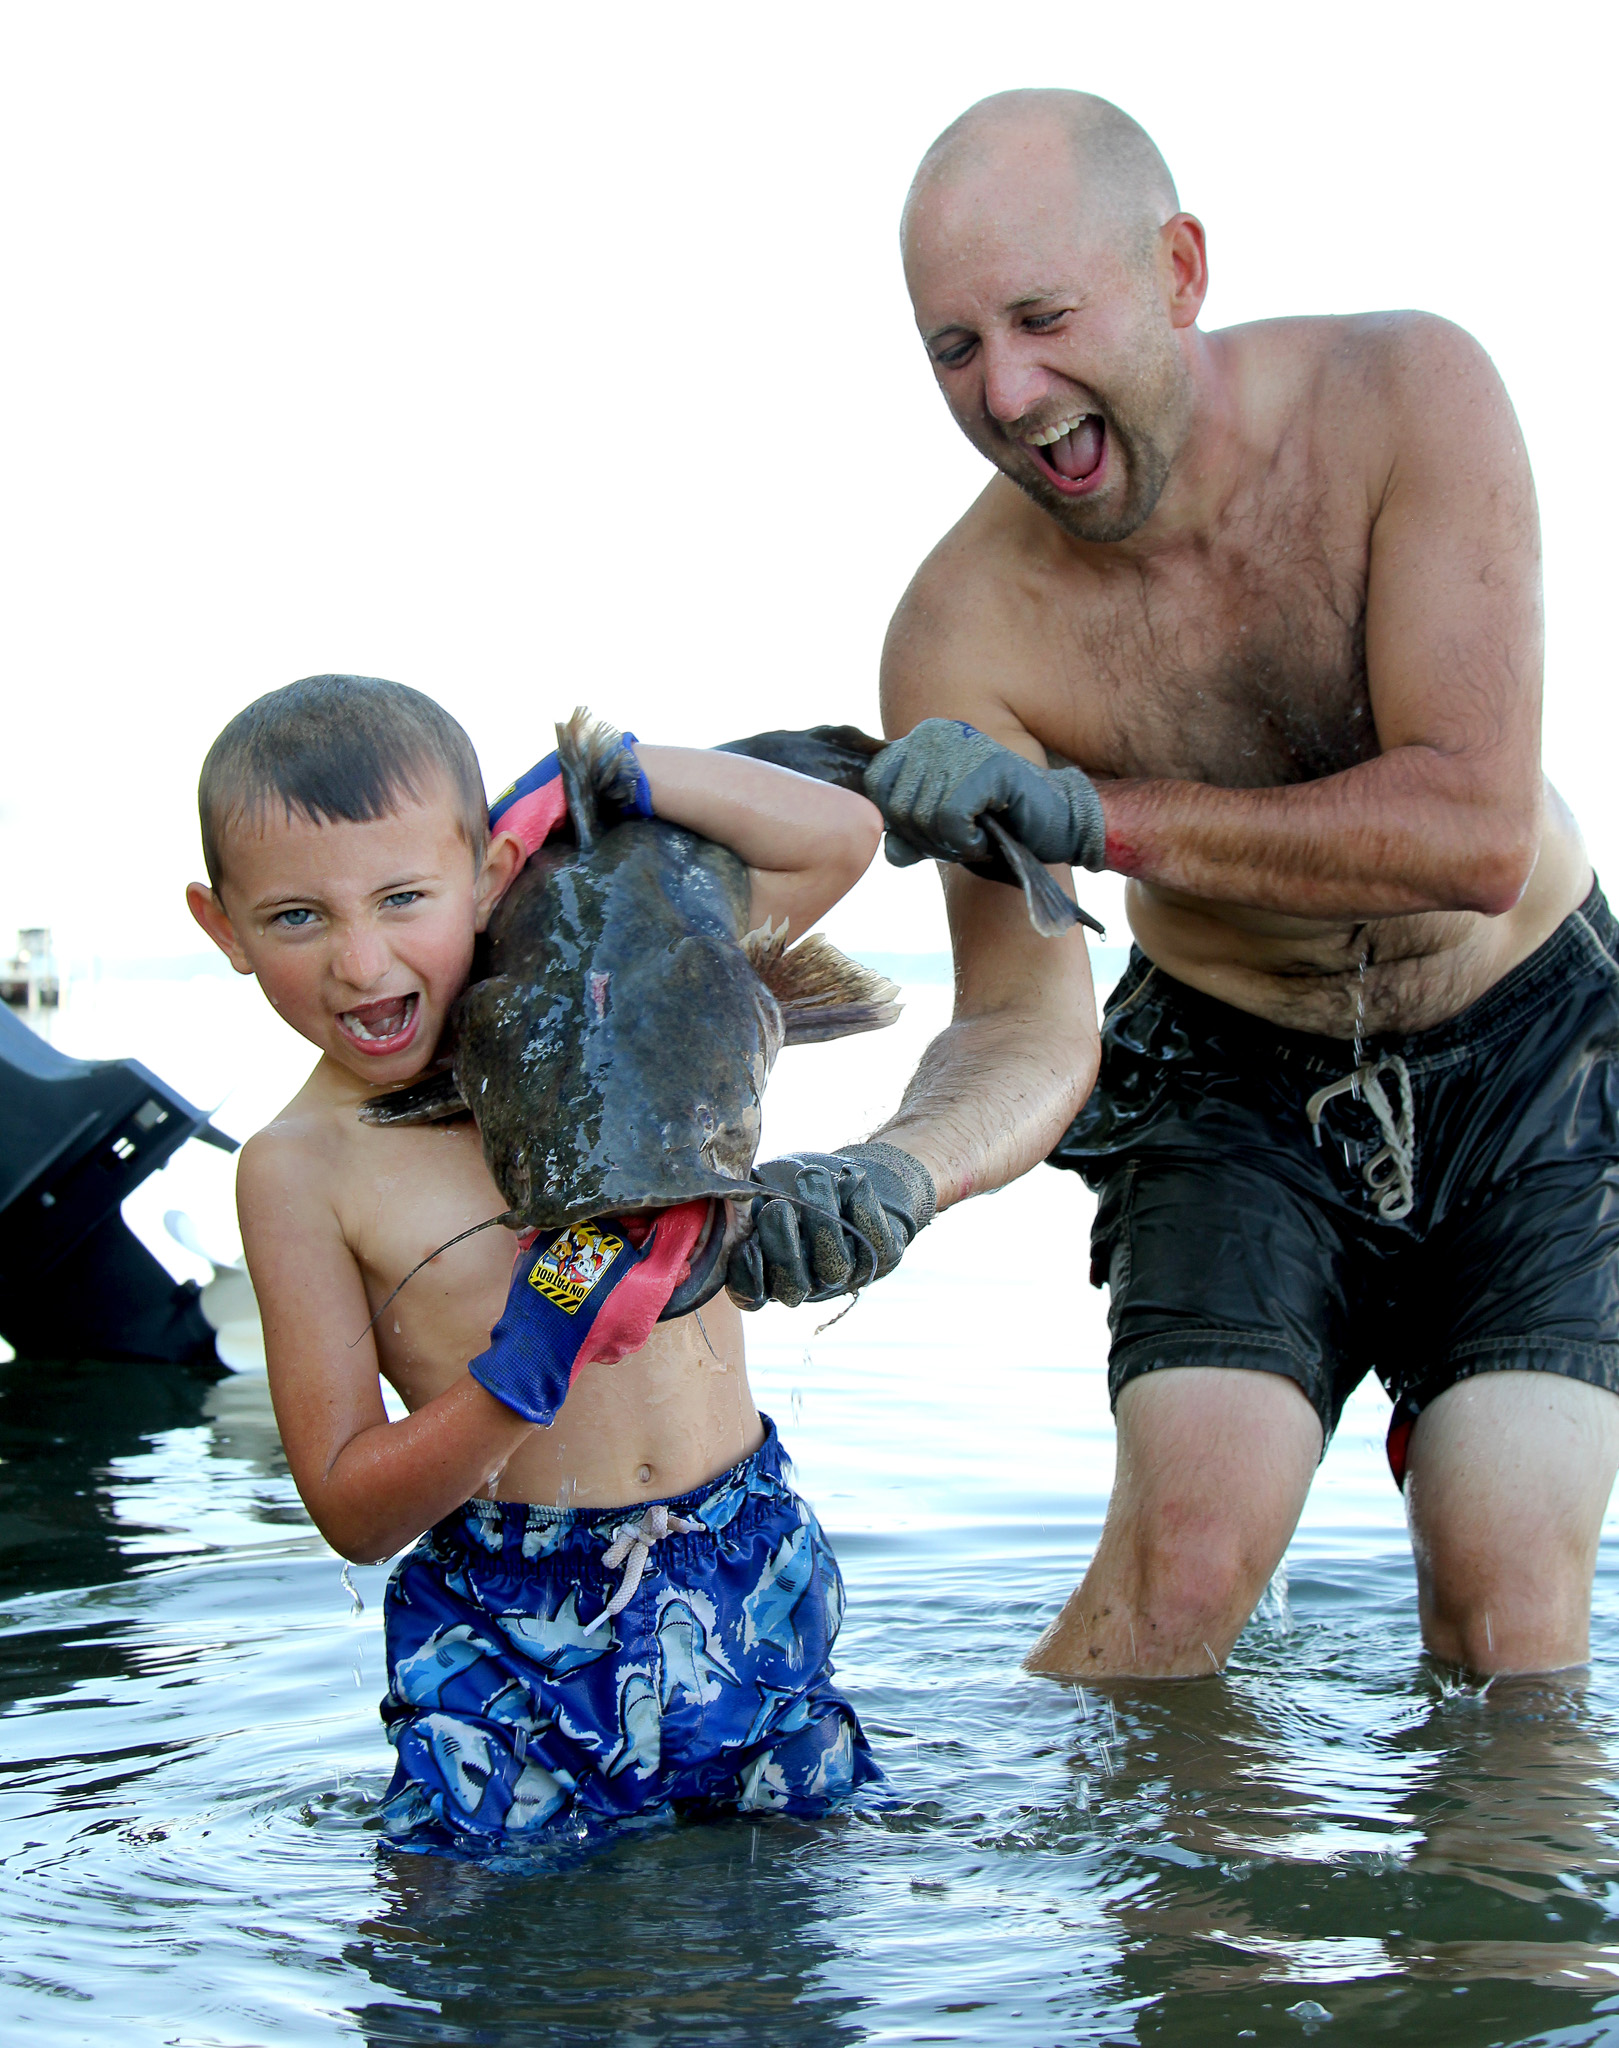 A dad helps his son hold up a flathead catfish he noodled.